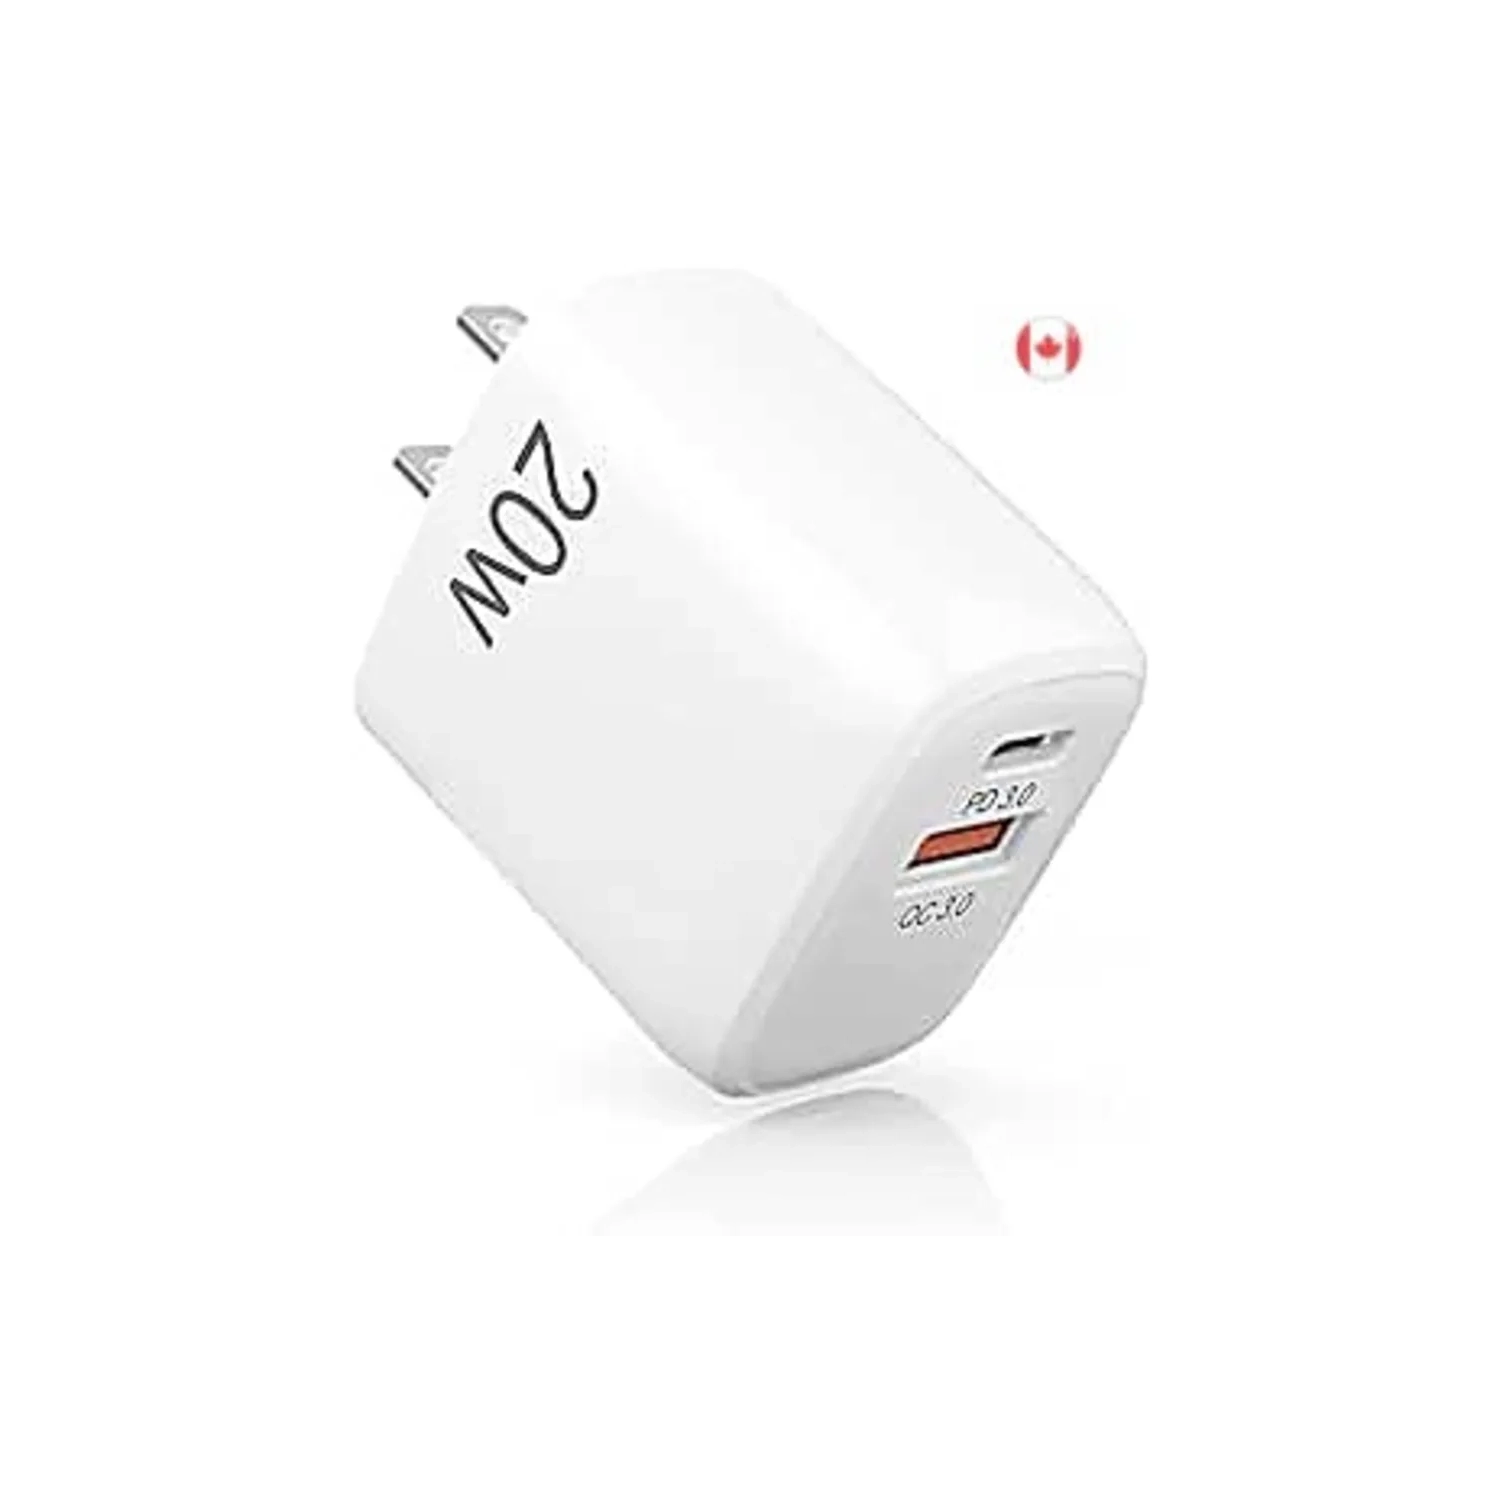 20W Dual Port USB C Charger | Power Delivery 3.0 Fast Adapter for iPhone 14/13/12/11/Pro Max/Mini, XR, X, Google Pixel, Samsung Galaxy, Huawei, Nintendo Switch, Earbuds, Smartwatch